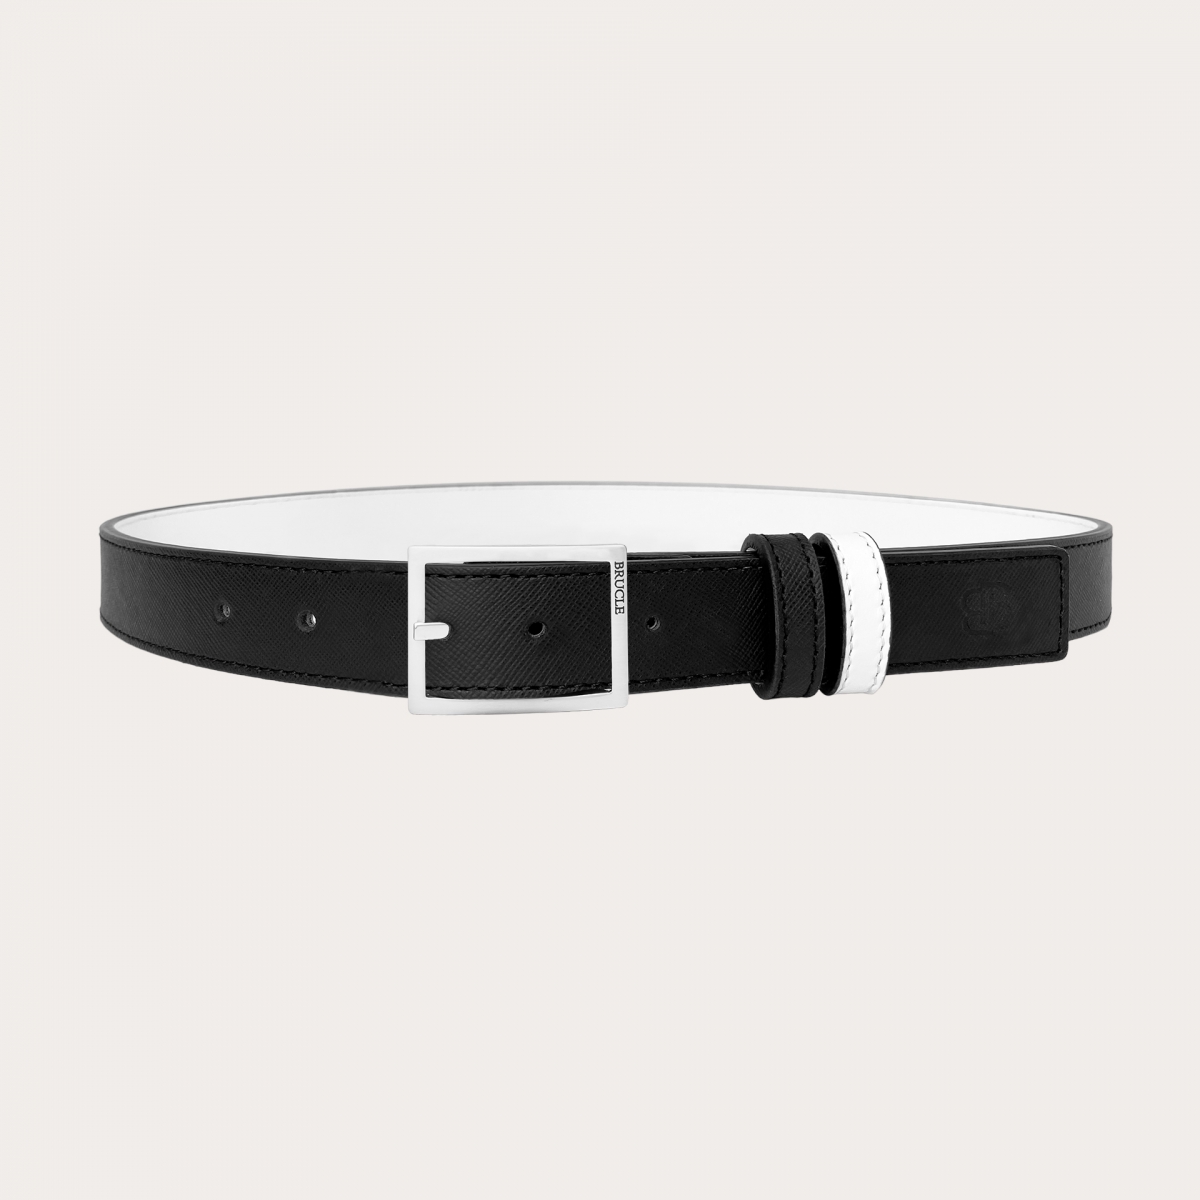 Reversible belt in black saffiano and white leather